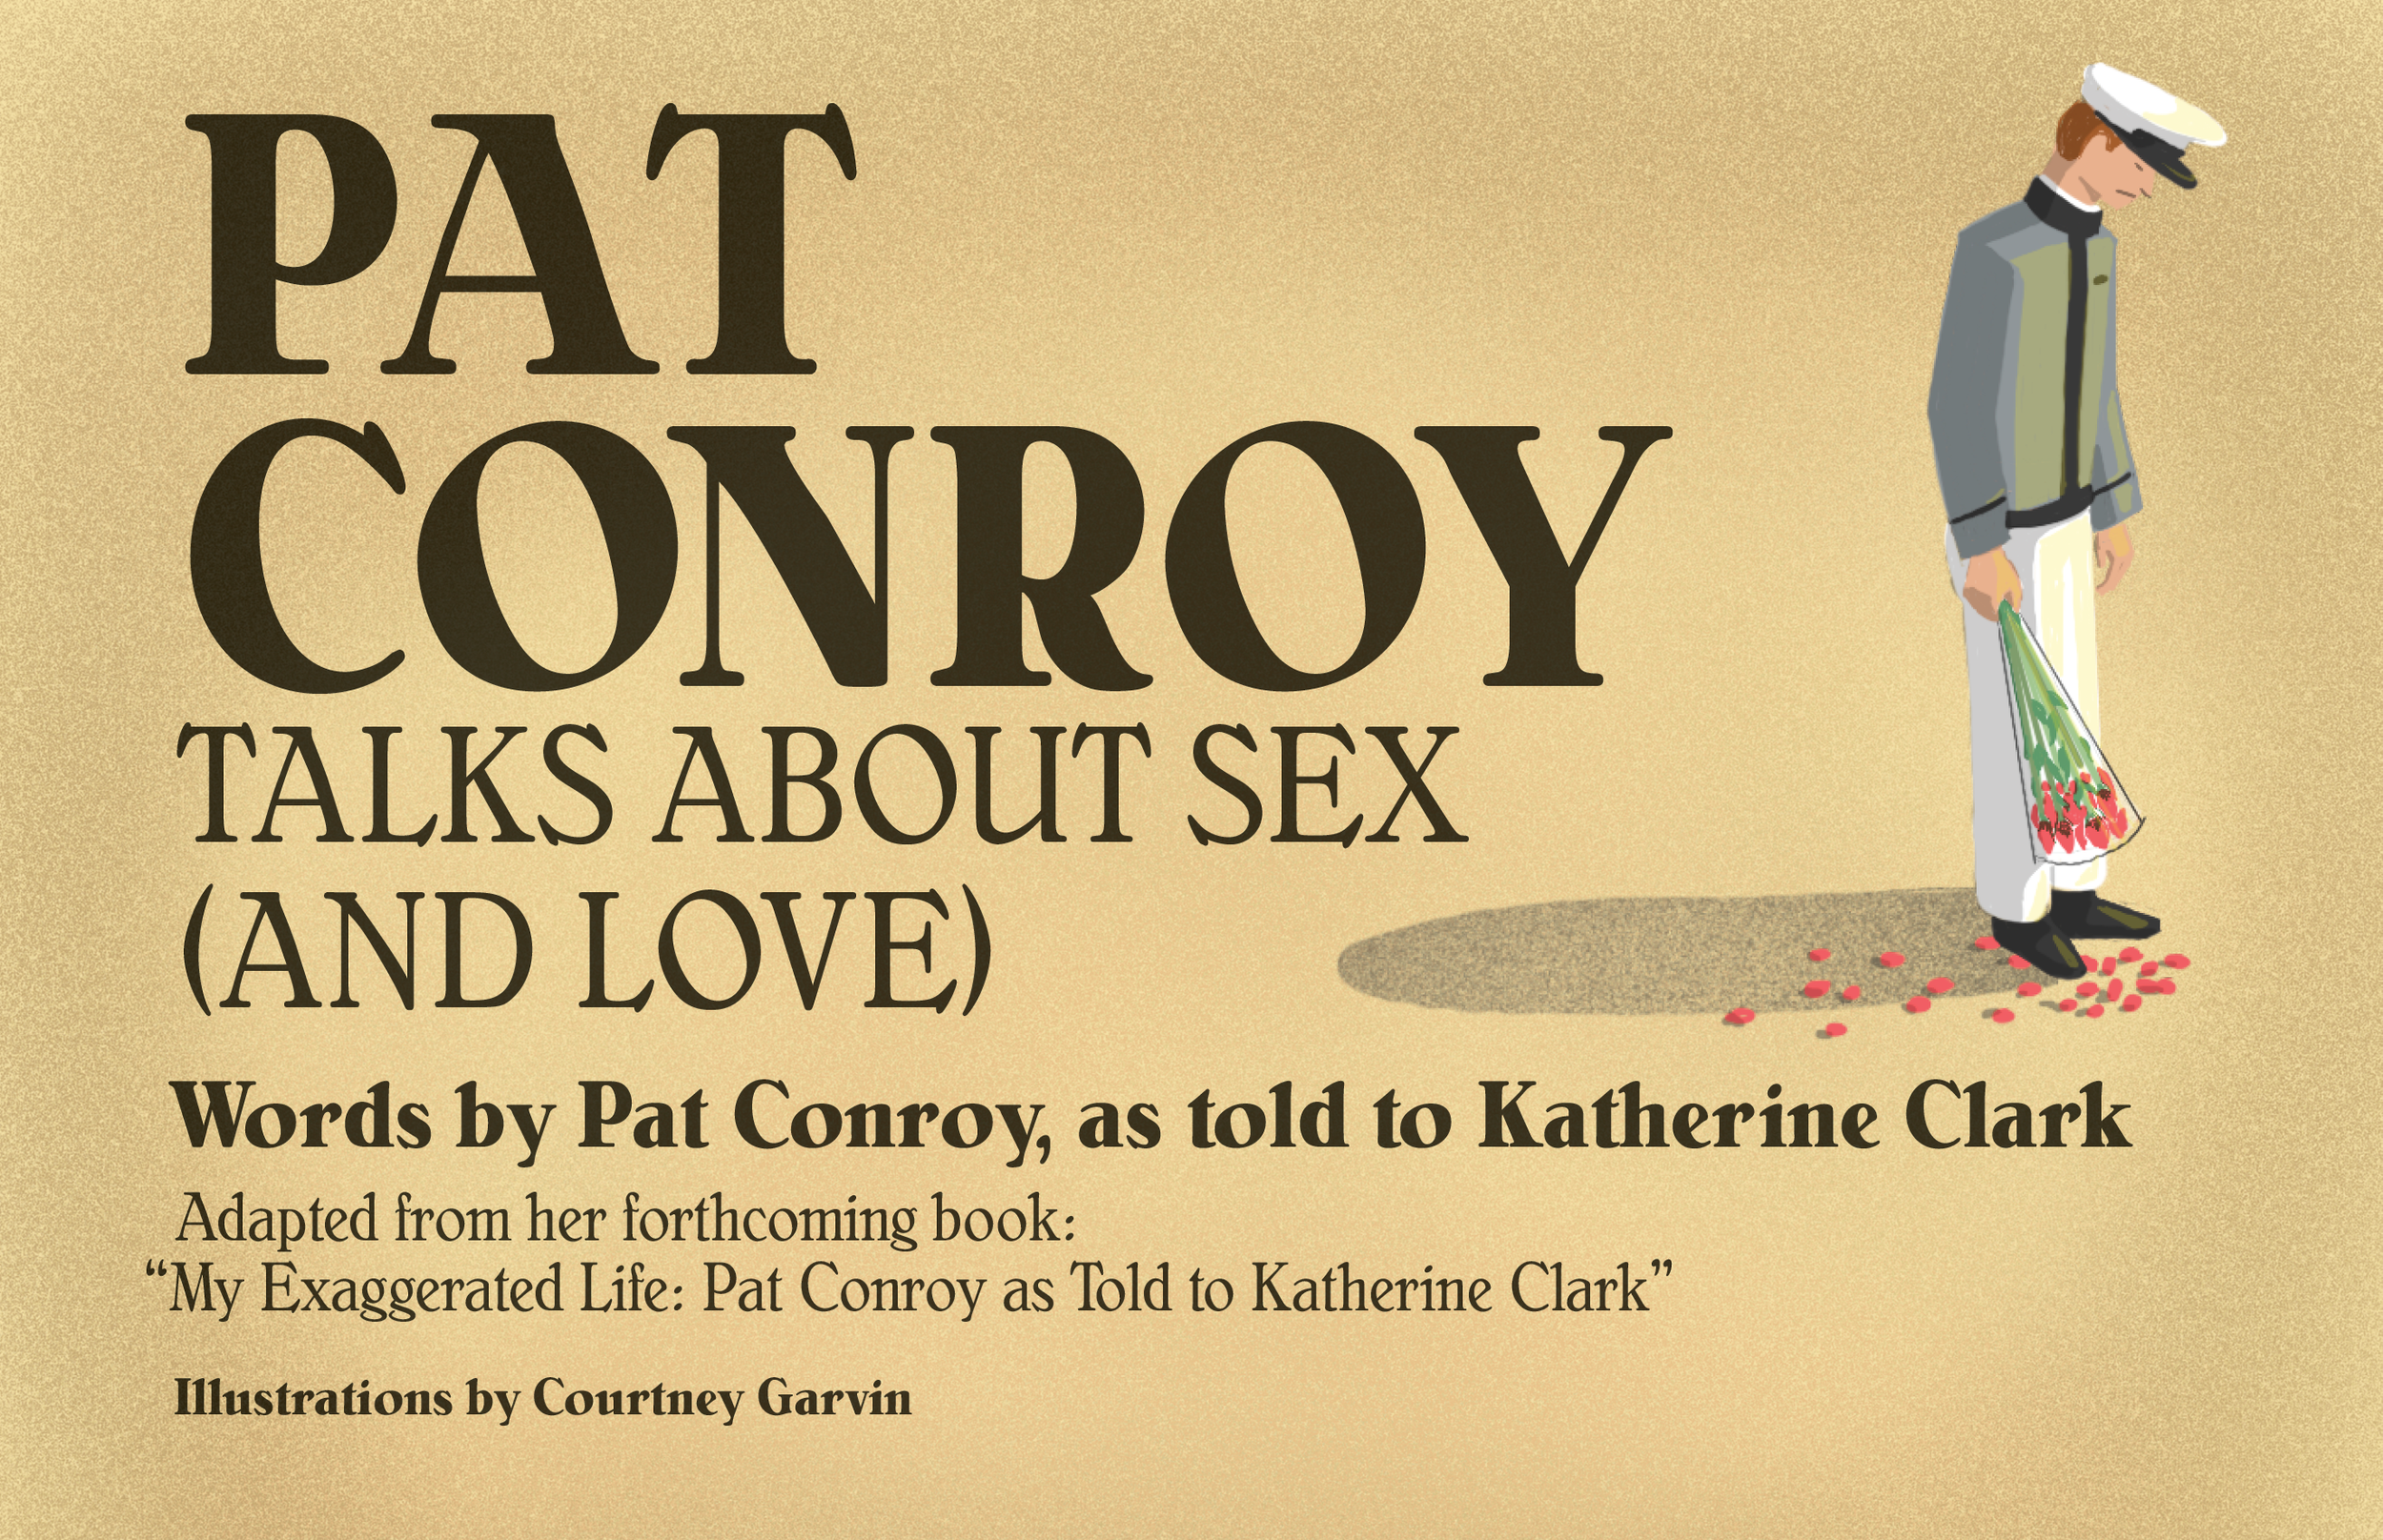 Pat Conroy Talks About Sex (and Love) — THE BITTER SOUTHERNER pic